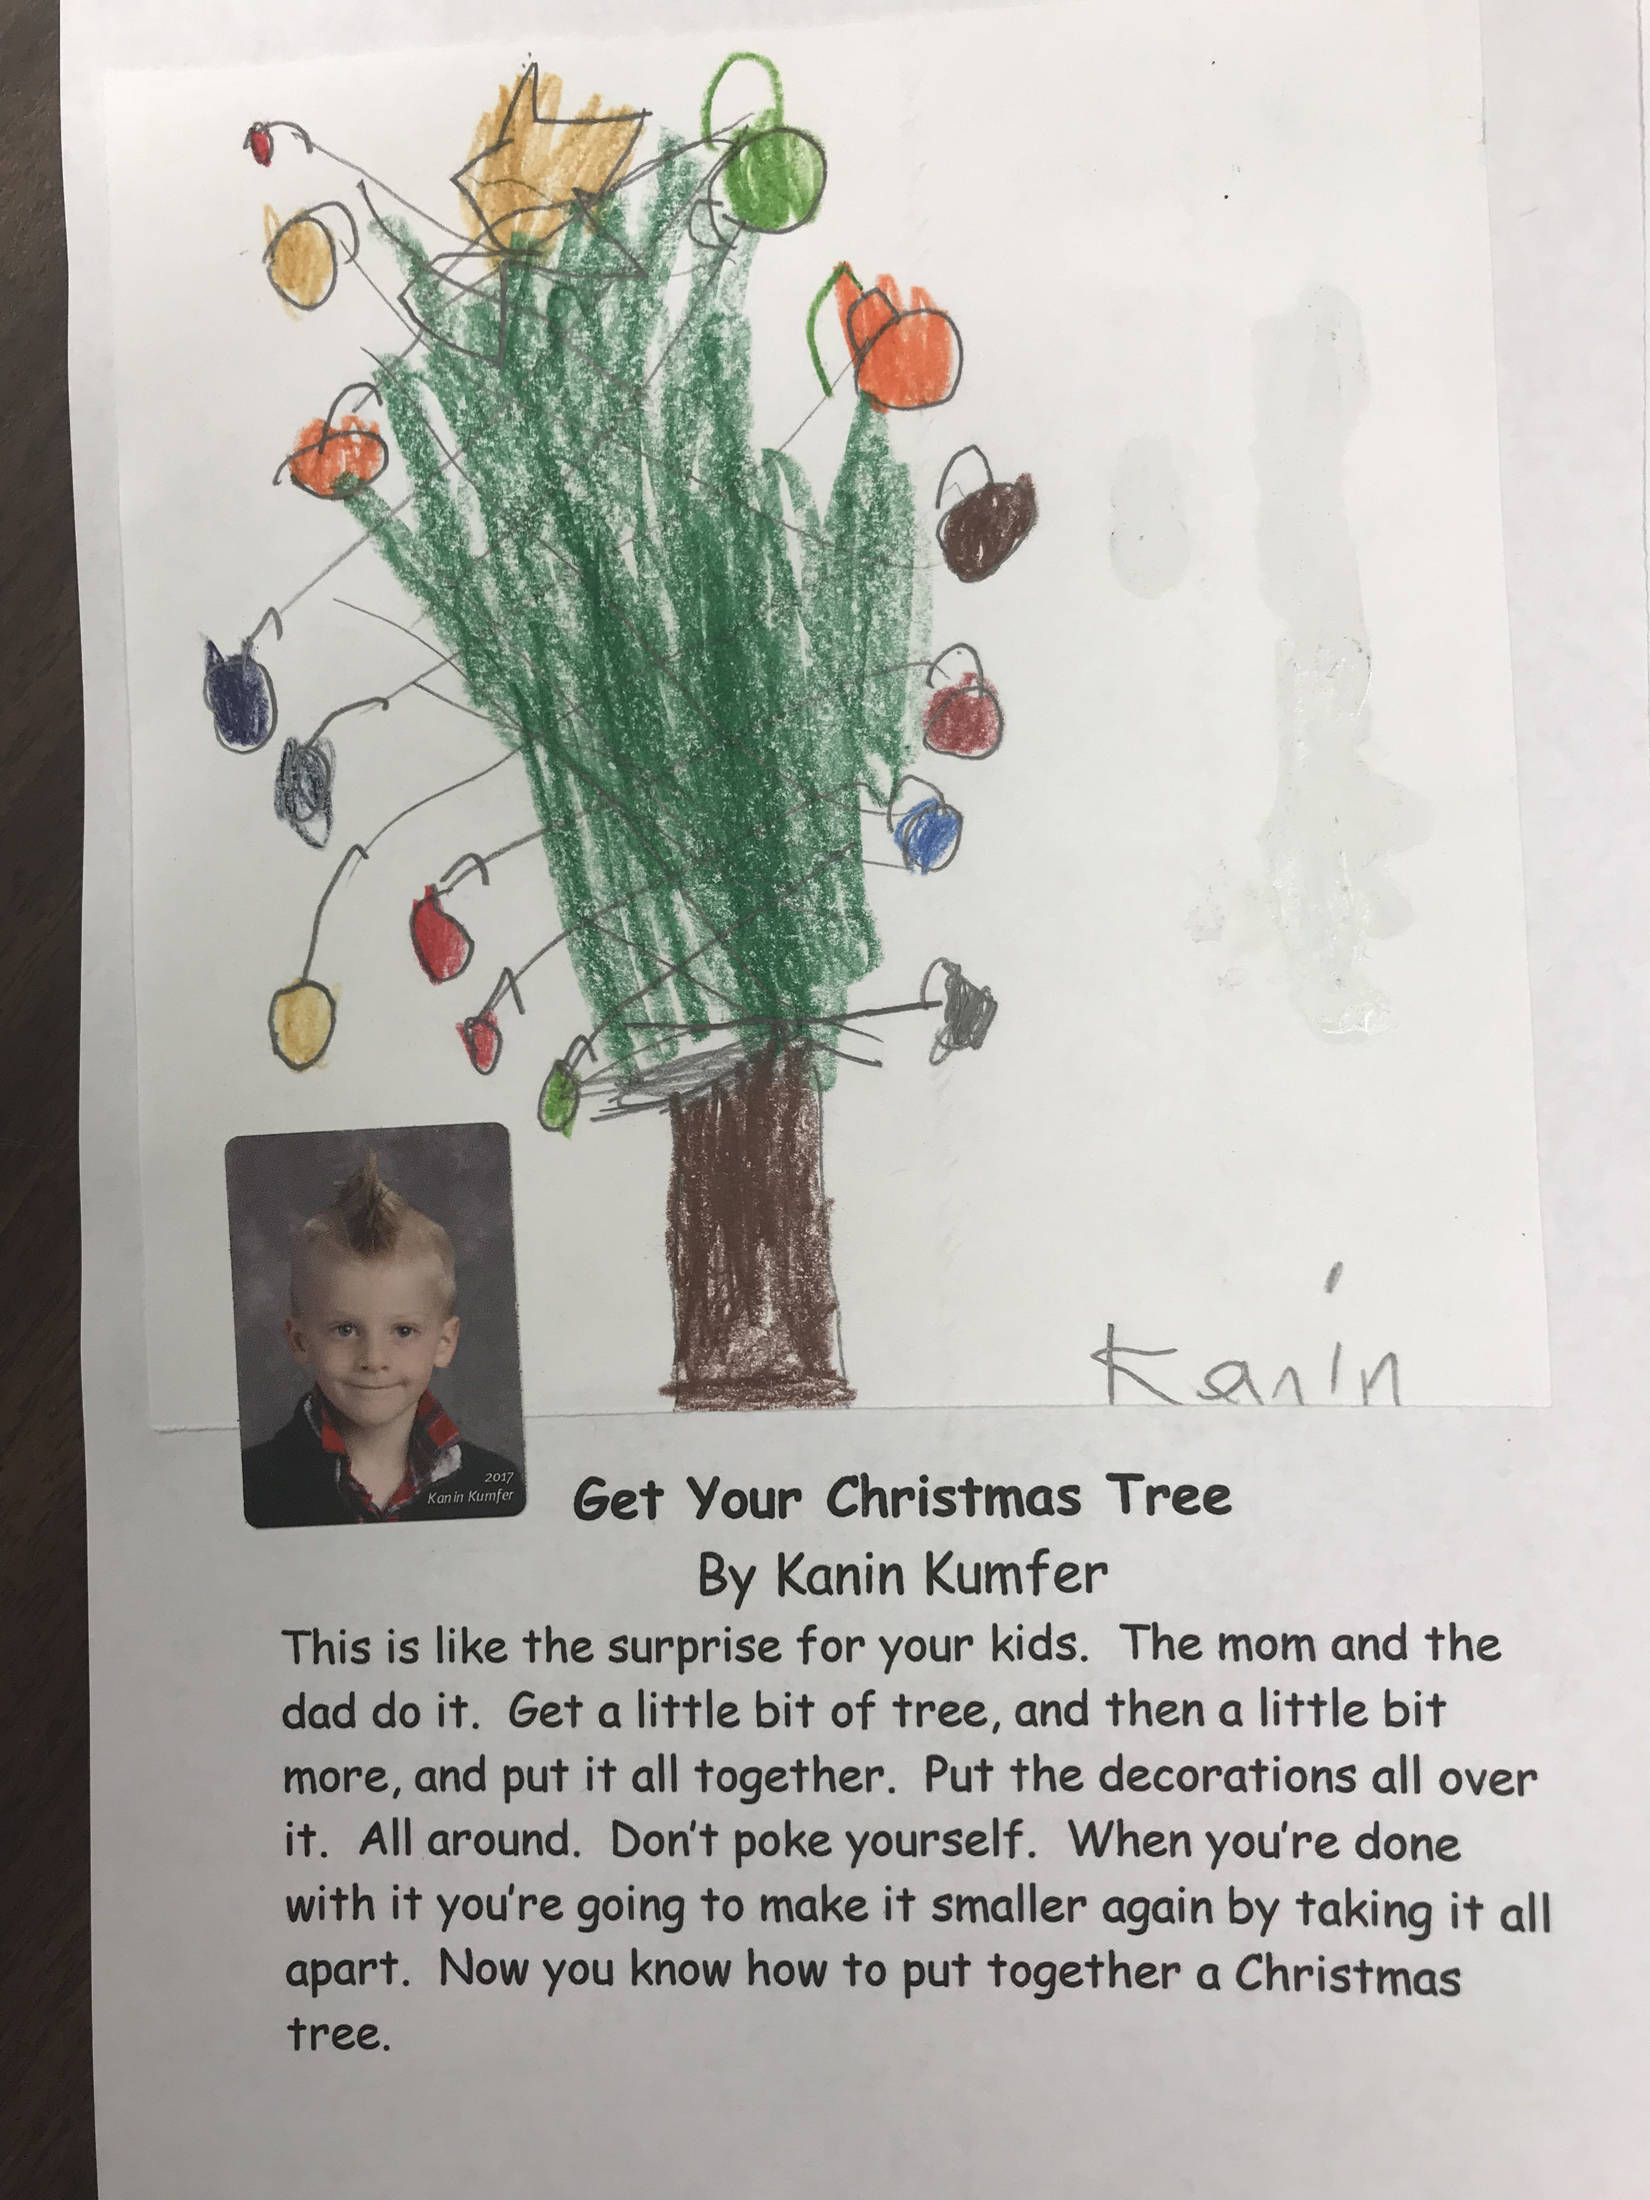 This holiday instruction made by Kanin Kumfer is part of an 18-page “How to Get Ready for the Holidays” book created by the students of Jennifer Reinhart’s kindergarten class. (Photo courtesy Jennifer Reinhart)